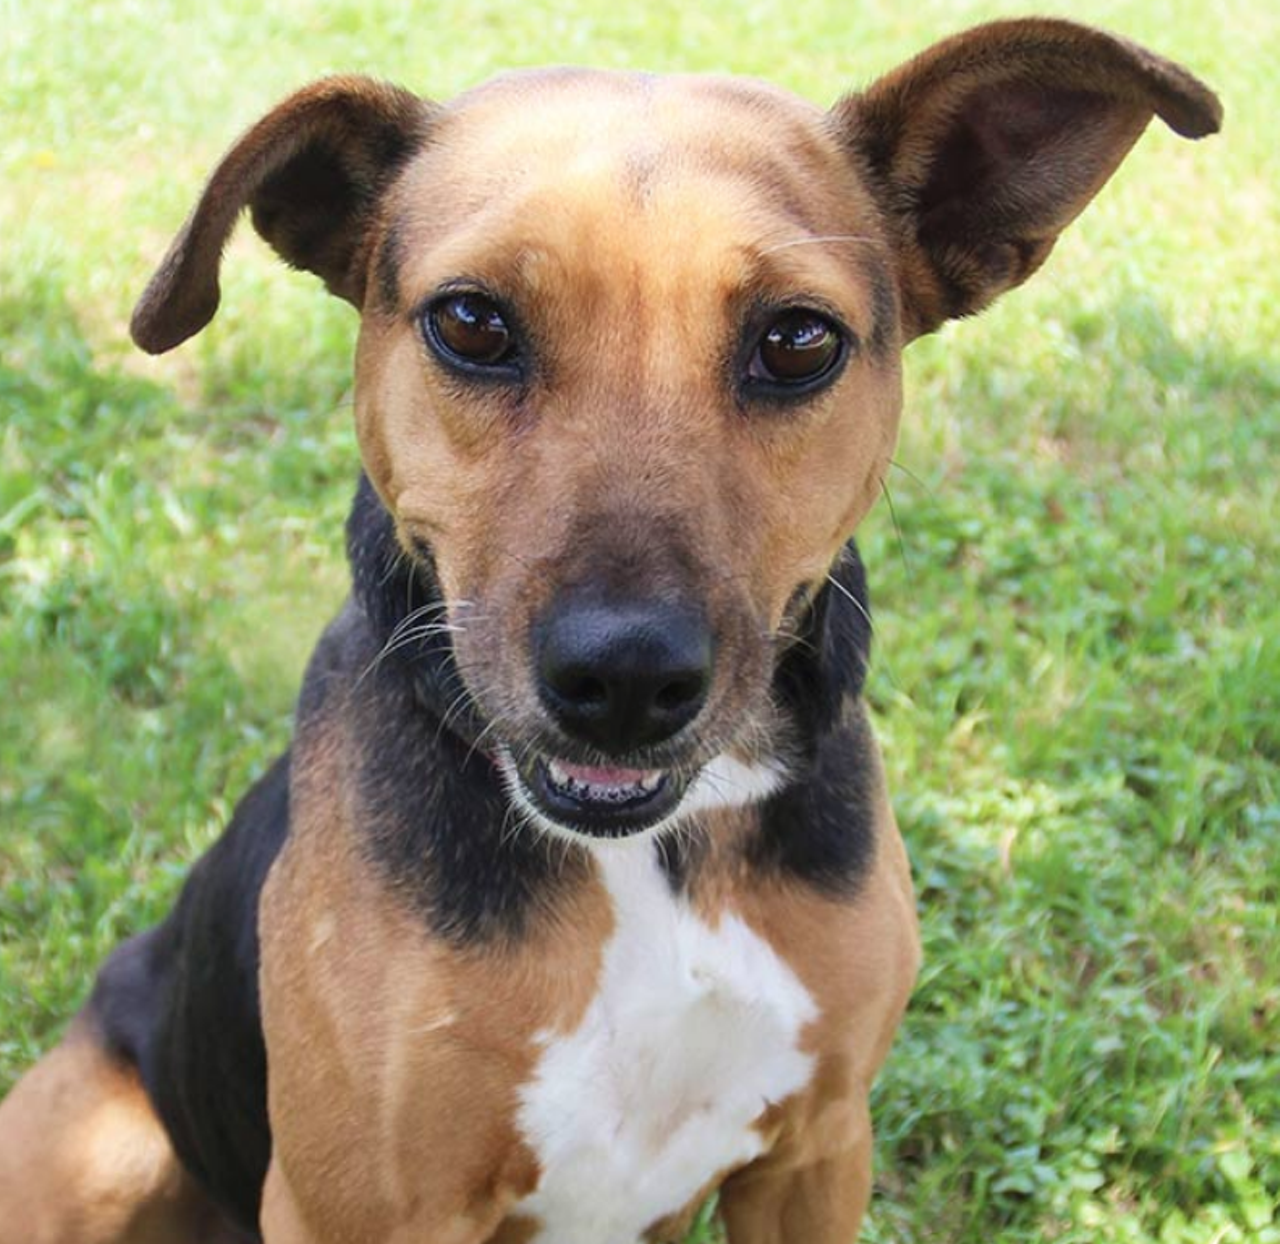 Leilani
"Hi, I’m Leilani! Do you like my floppy ears? People around here seem to like them and they seem to think I’m very pretty too. I love to be around people but can be a tiny bit shy in new situations. I am sweet, gentle, easygoing, and ready to hang out with you!"